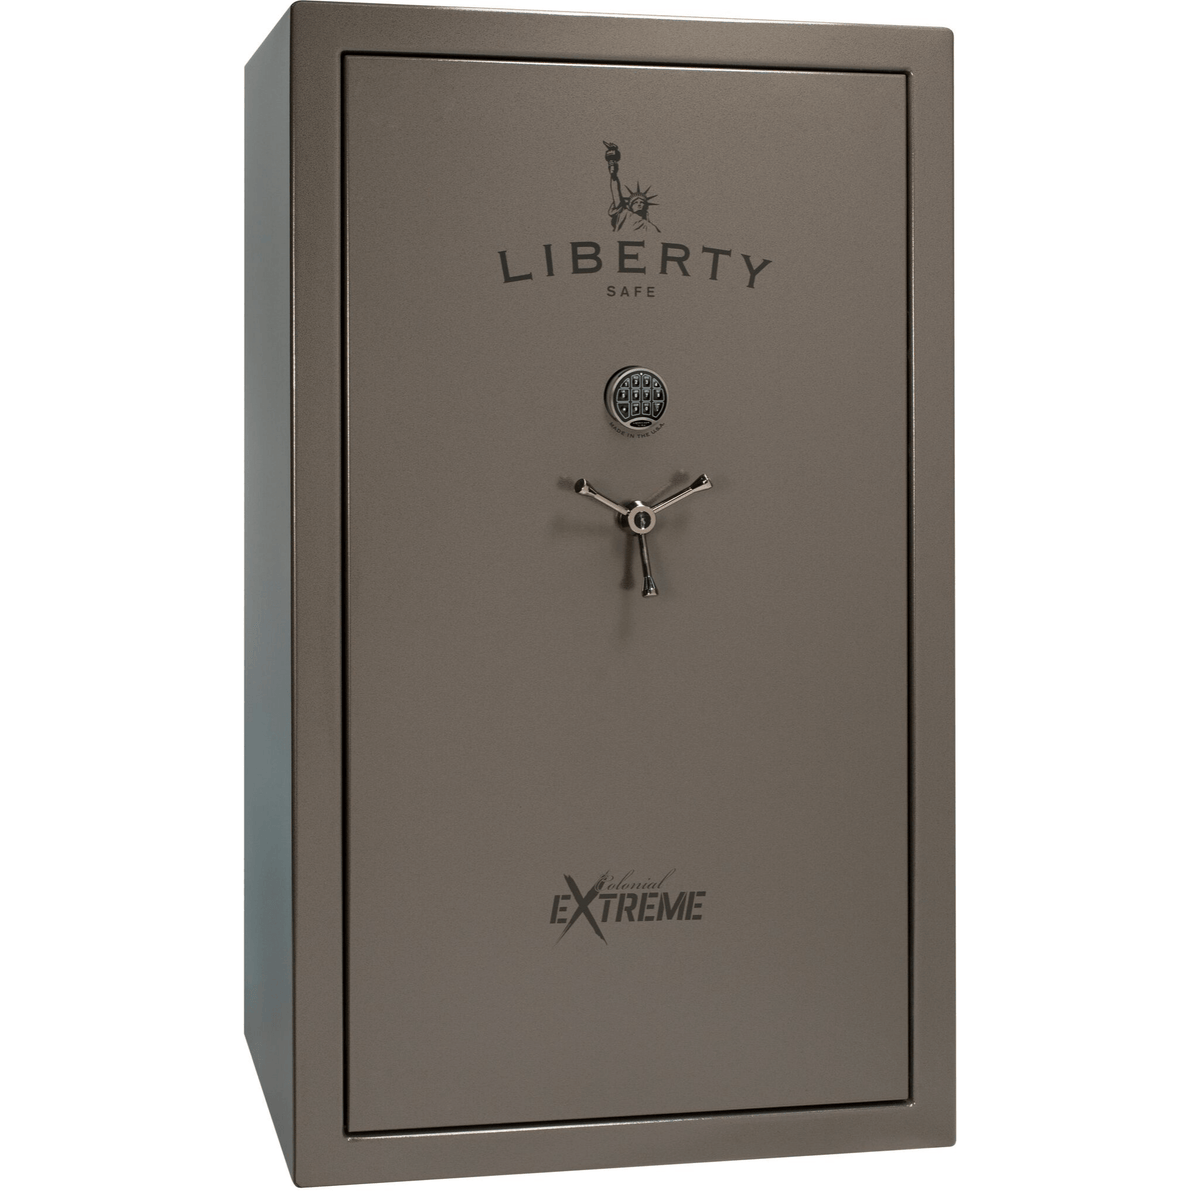 Liberty Colonial 50 Extreme Safe in Gray Marble with Black Chrome Electronic Lock.